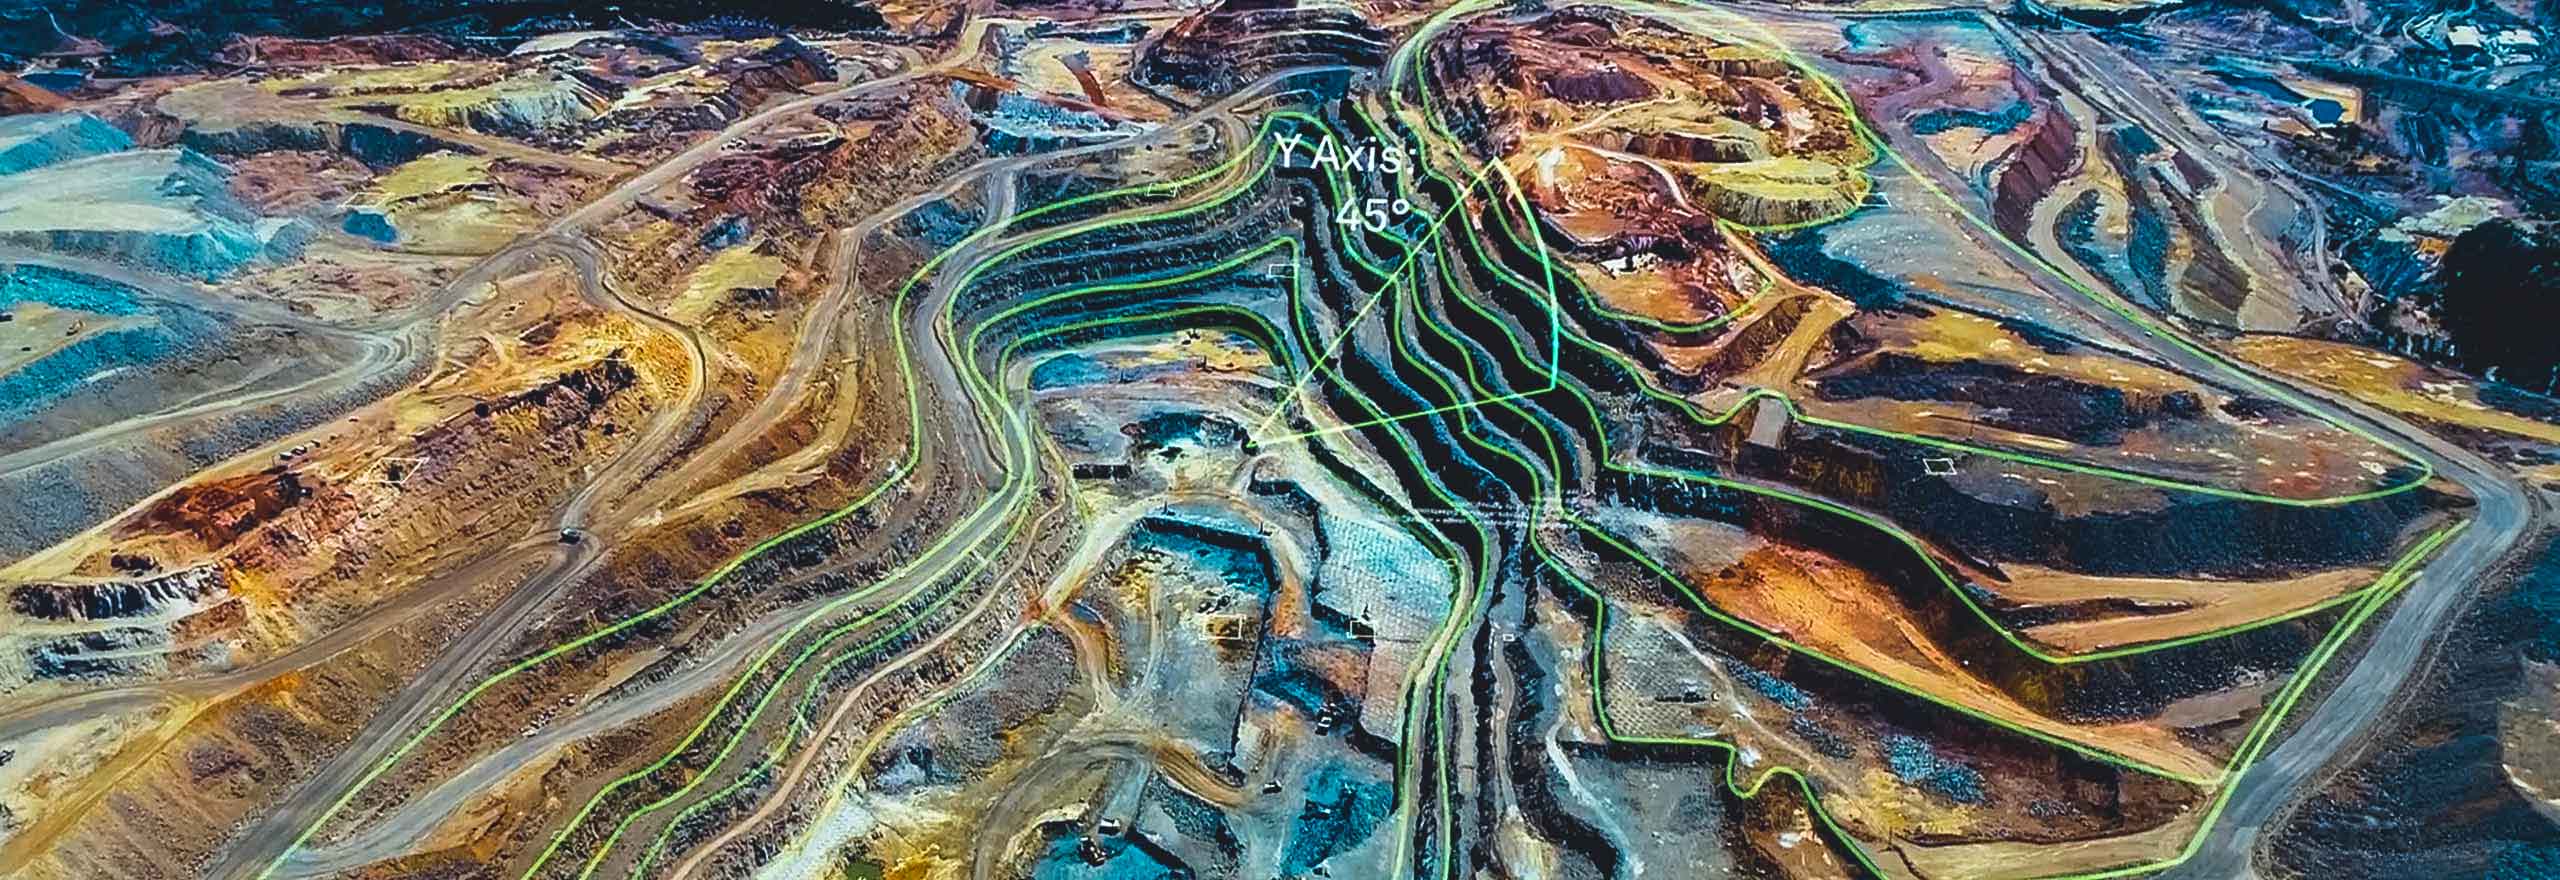 An aerial view of a mine overlayed with digital elements that represent analytics